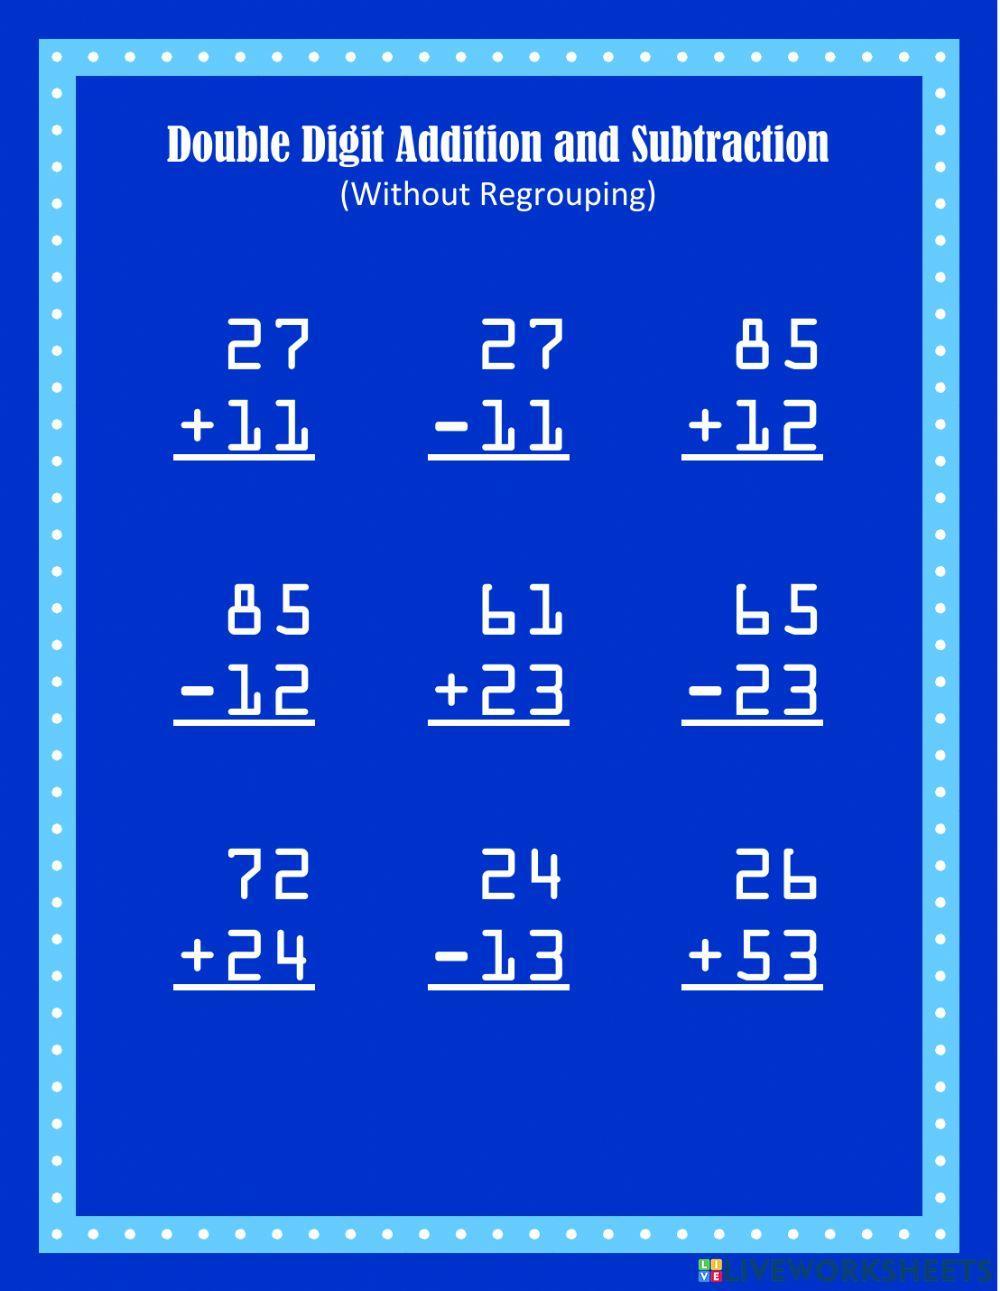 Double Digit Addition and Subtraction Set 7